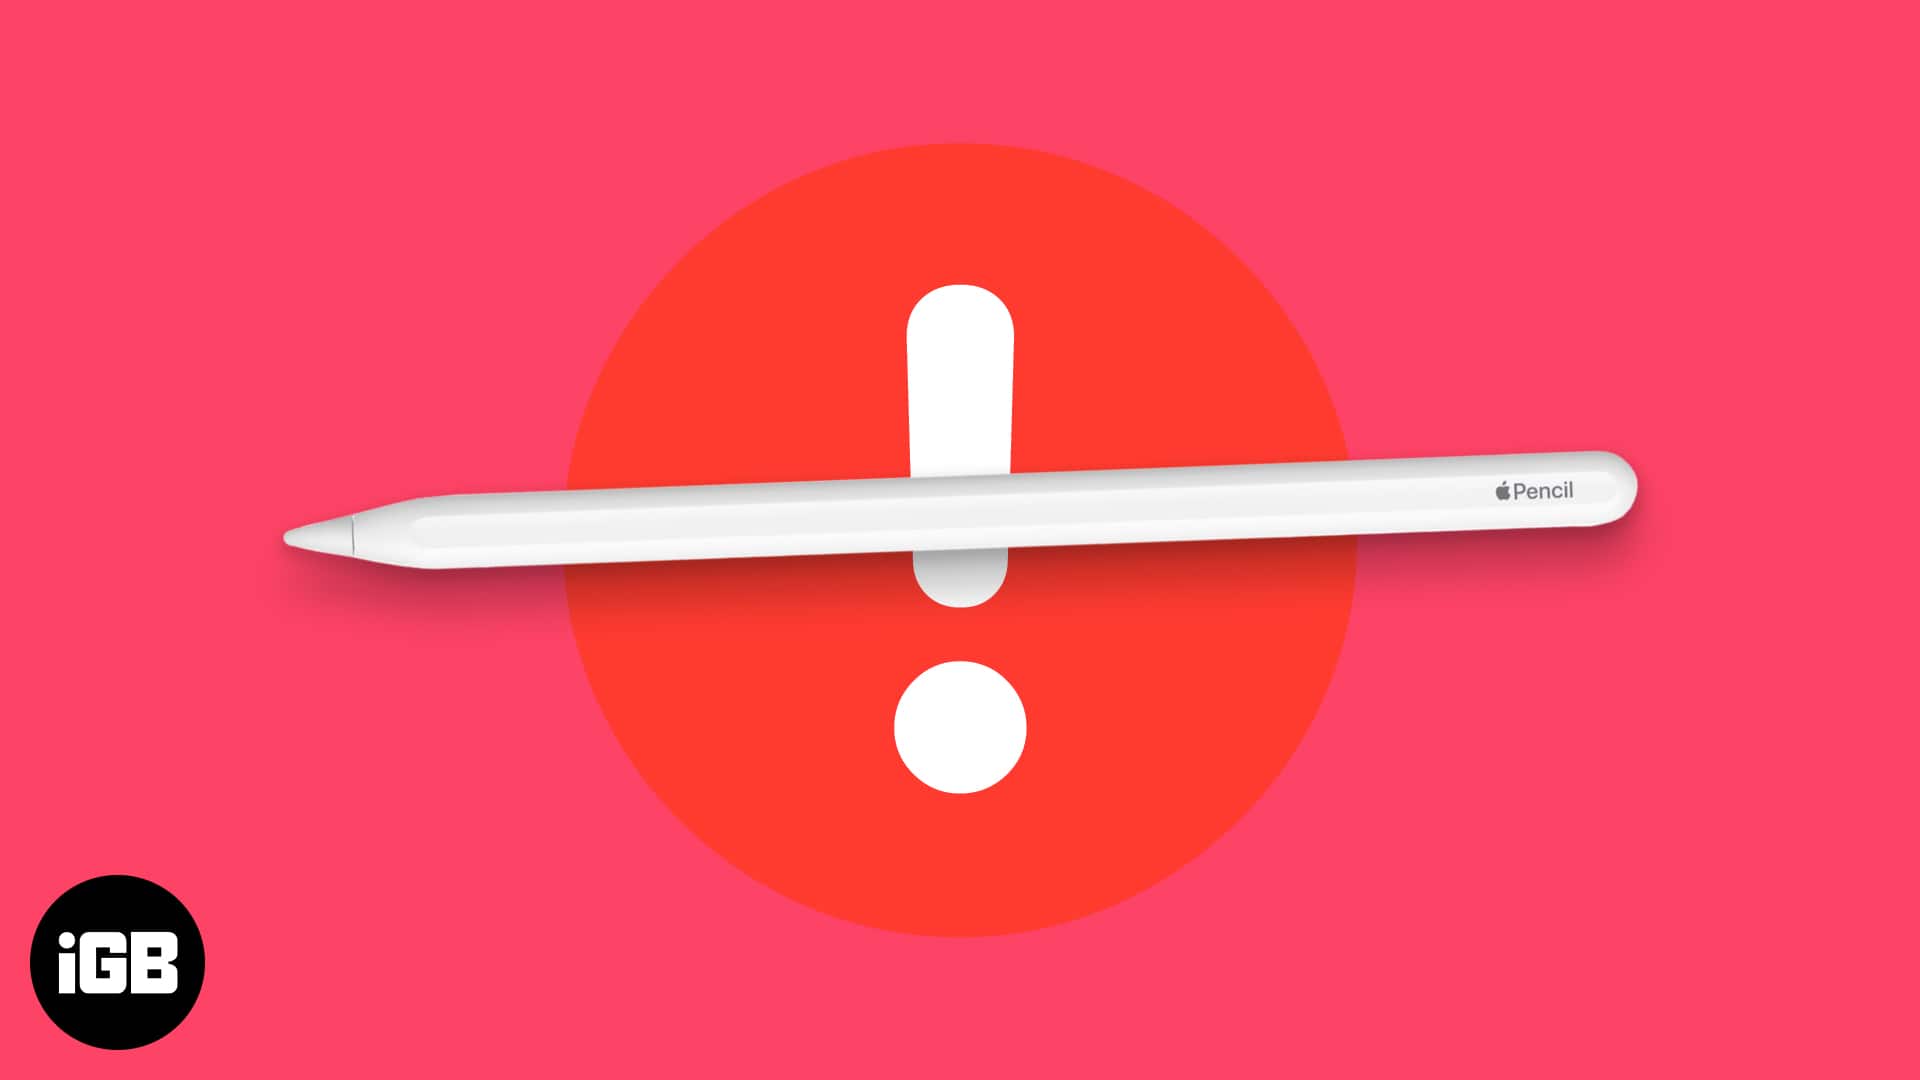 How to fix apple pencil not working